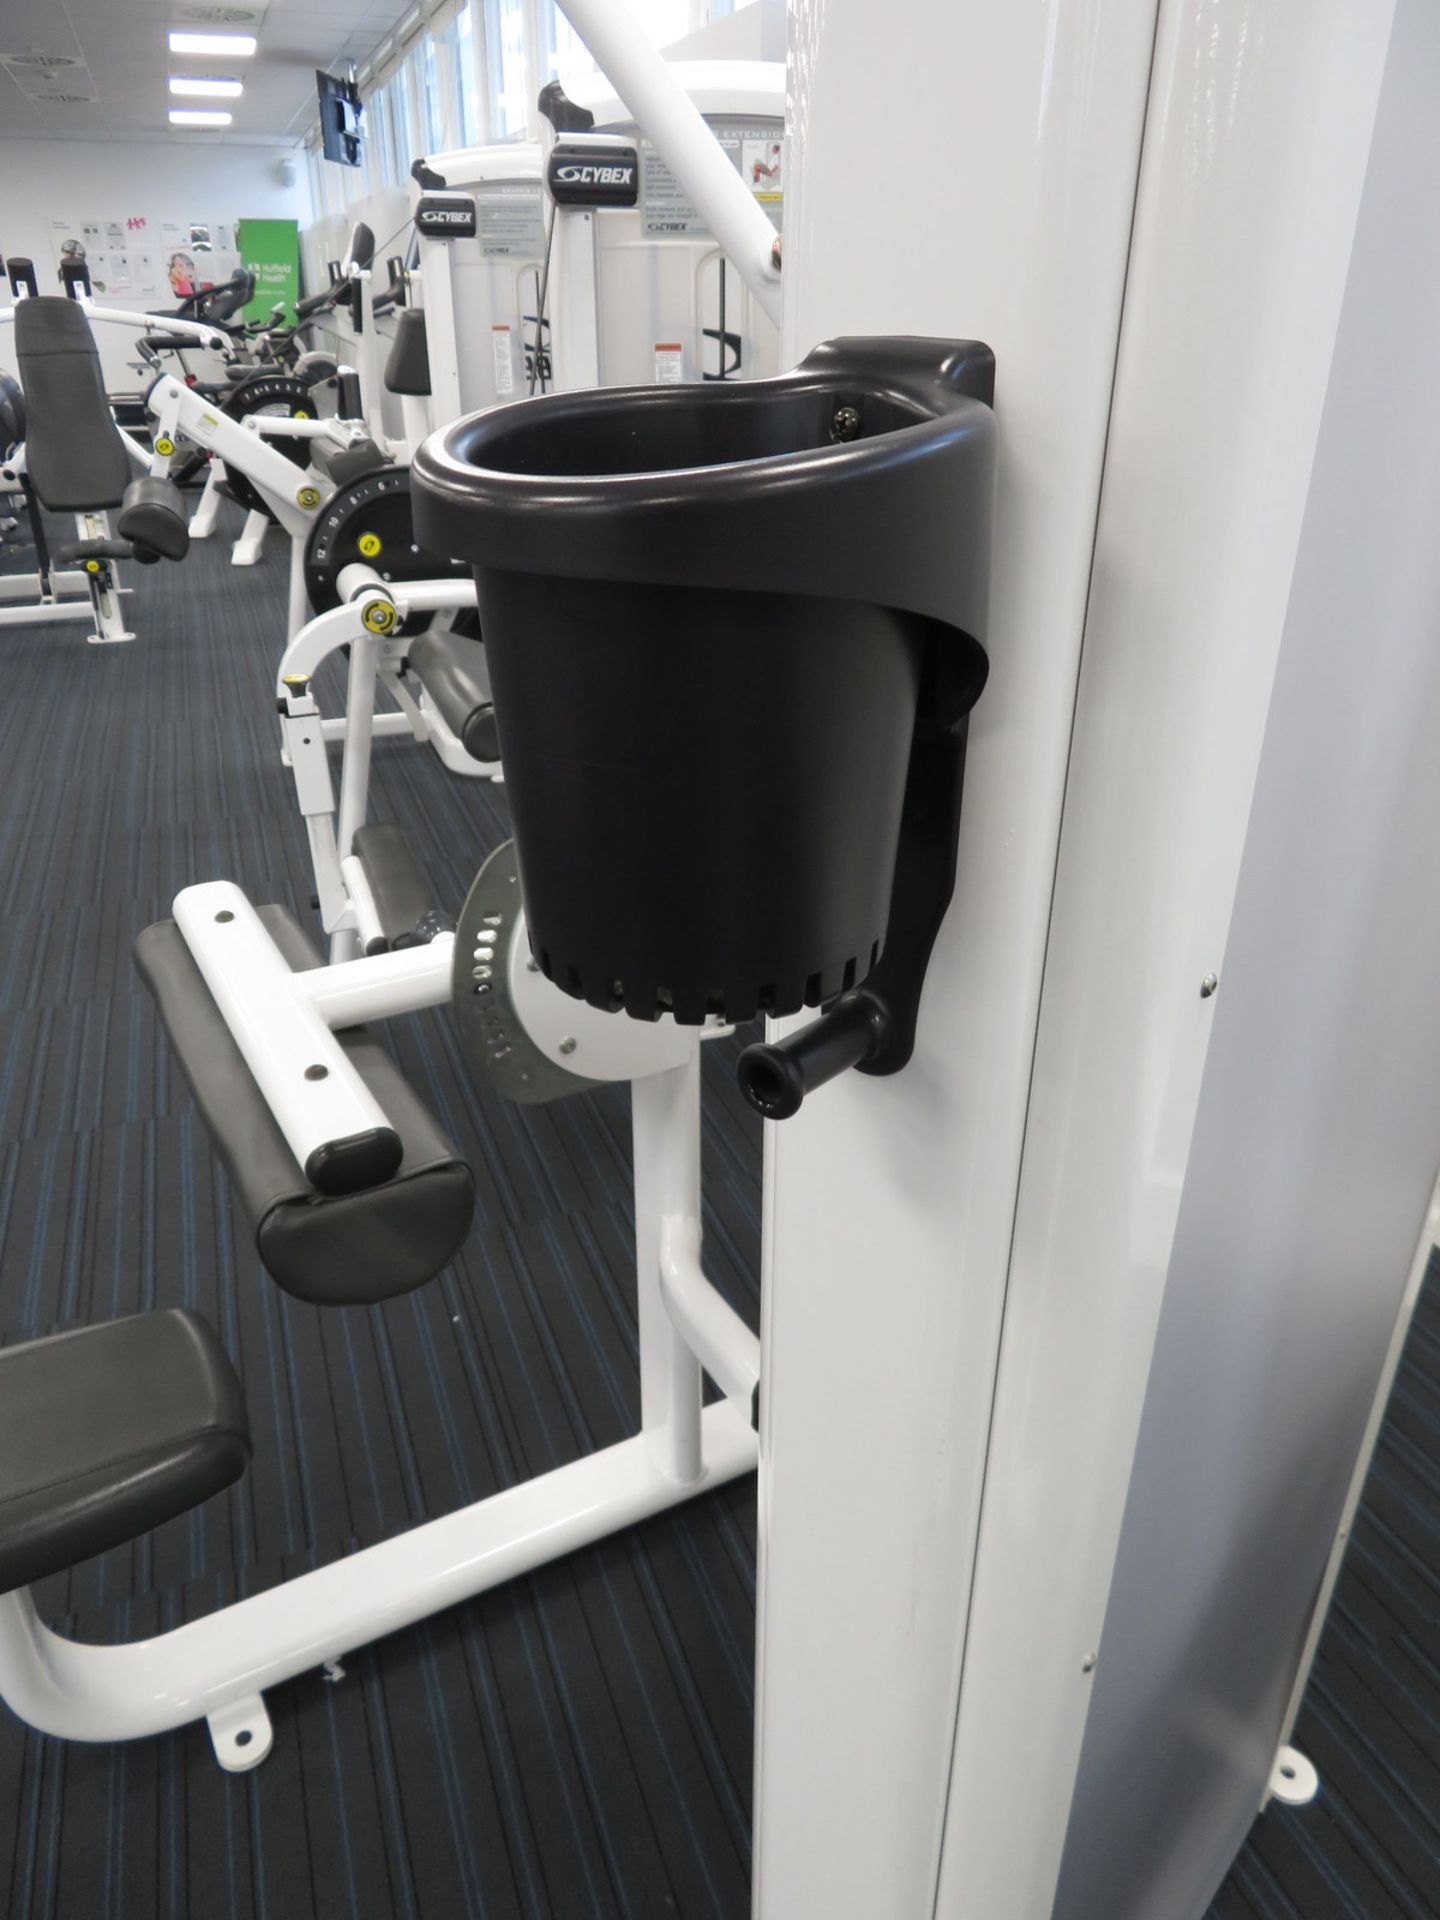 Cybex Pulldown Model: 12020. 103.5kg Weight Stack. Dimensions: 115x175x195cm (LxDxH) - Image 8 of 10